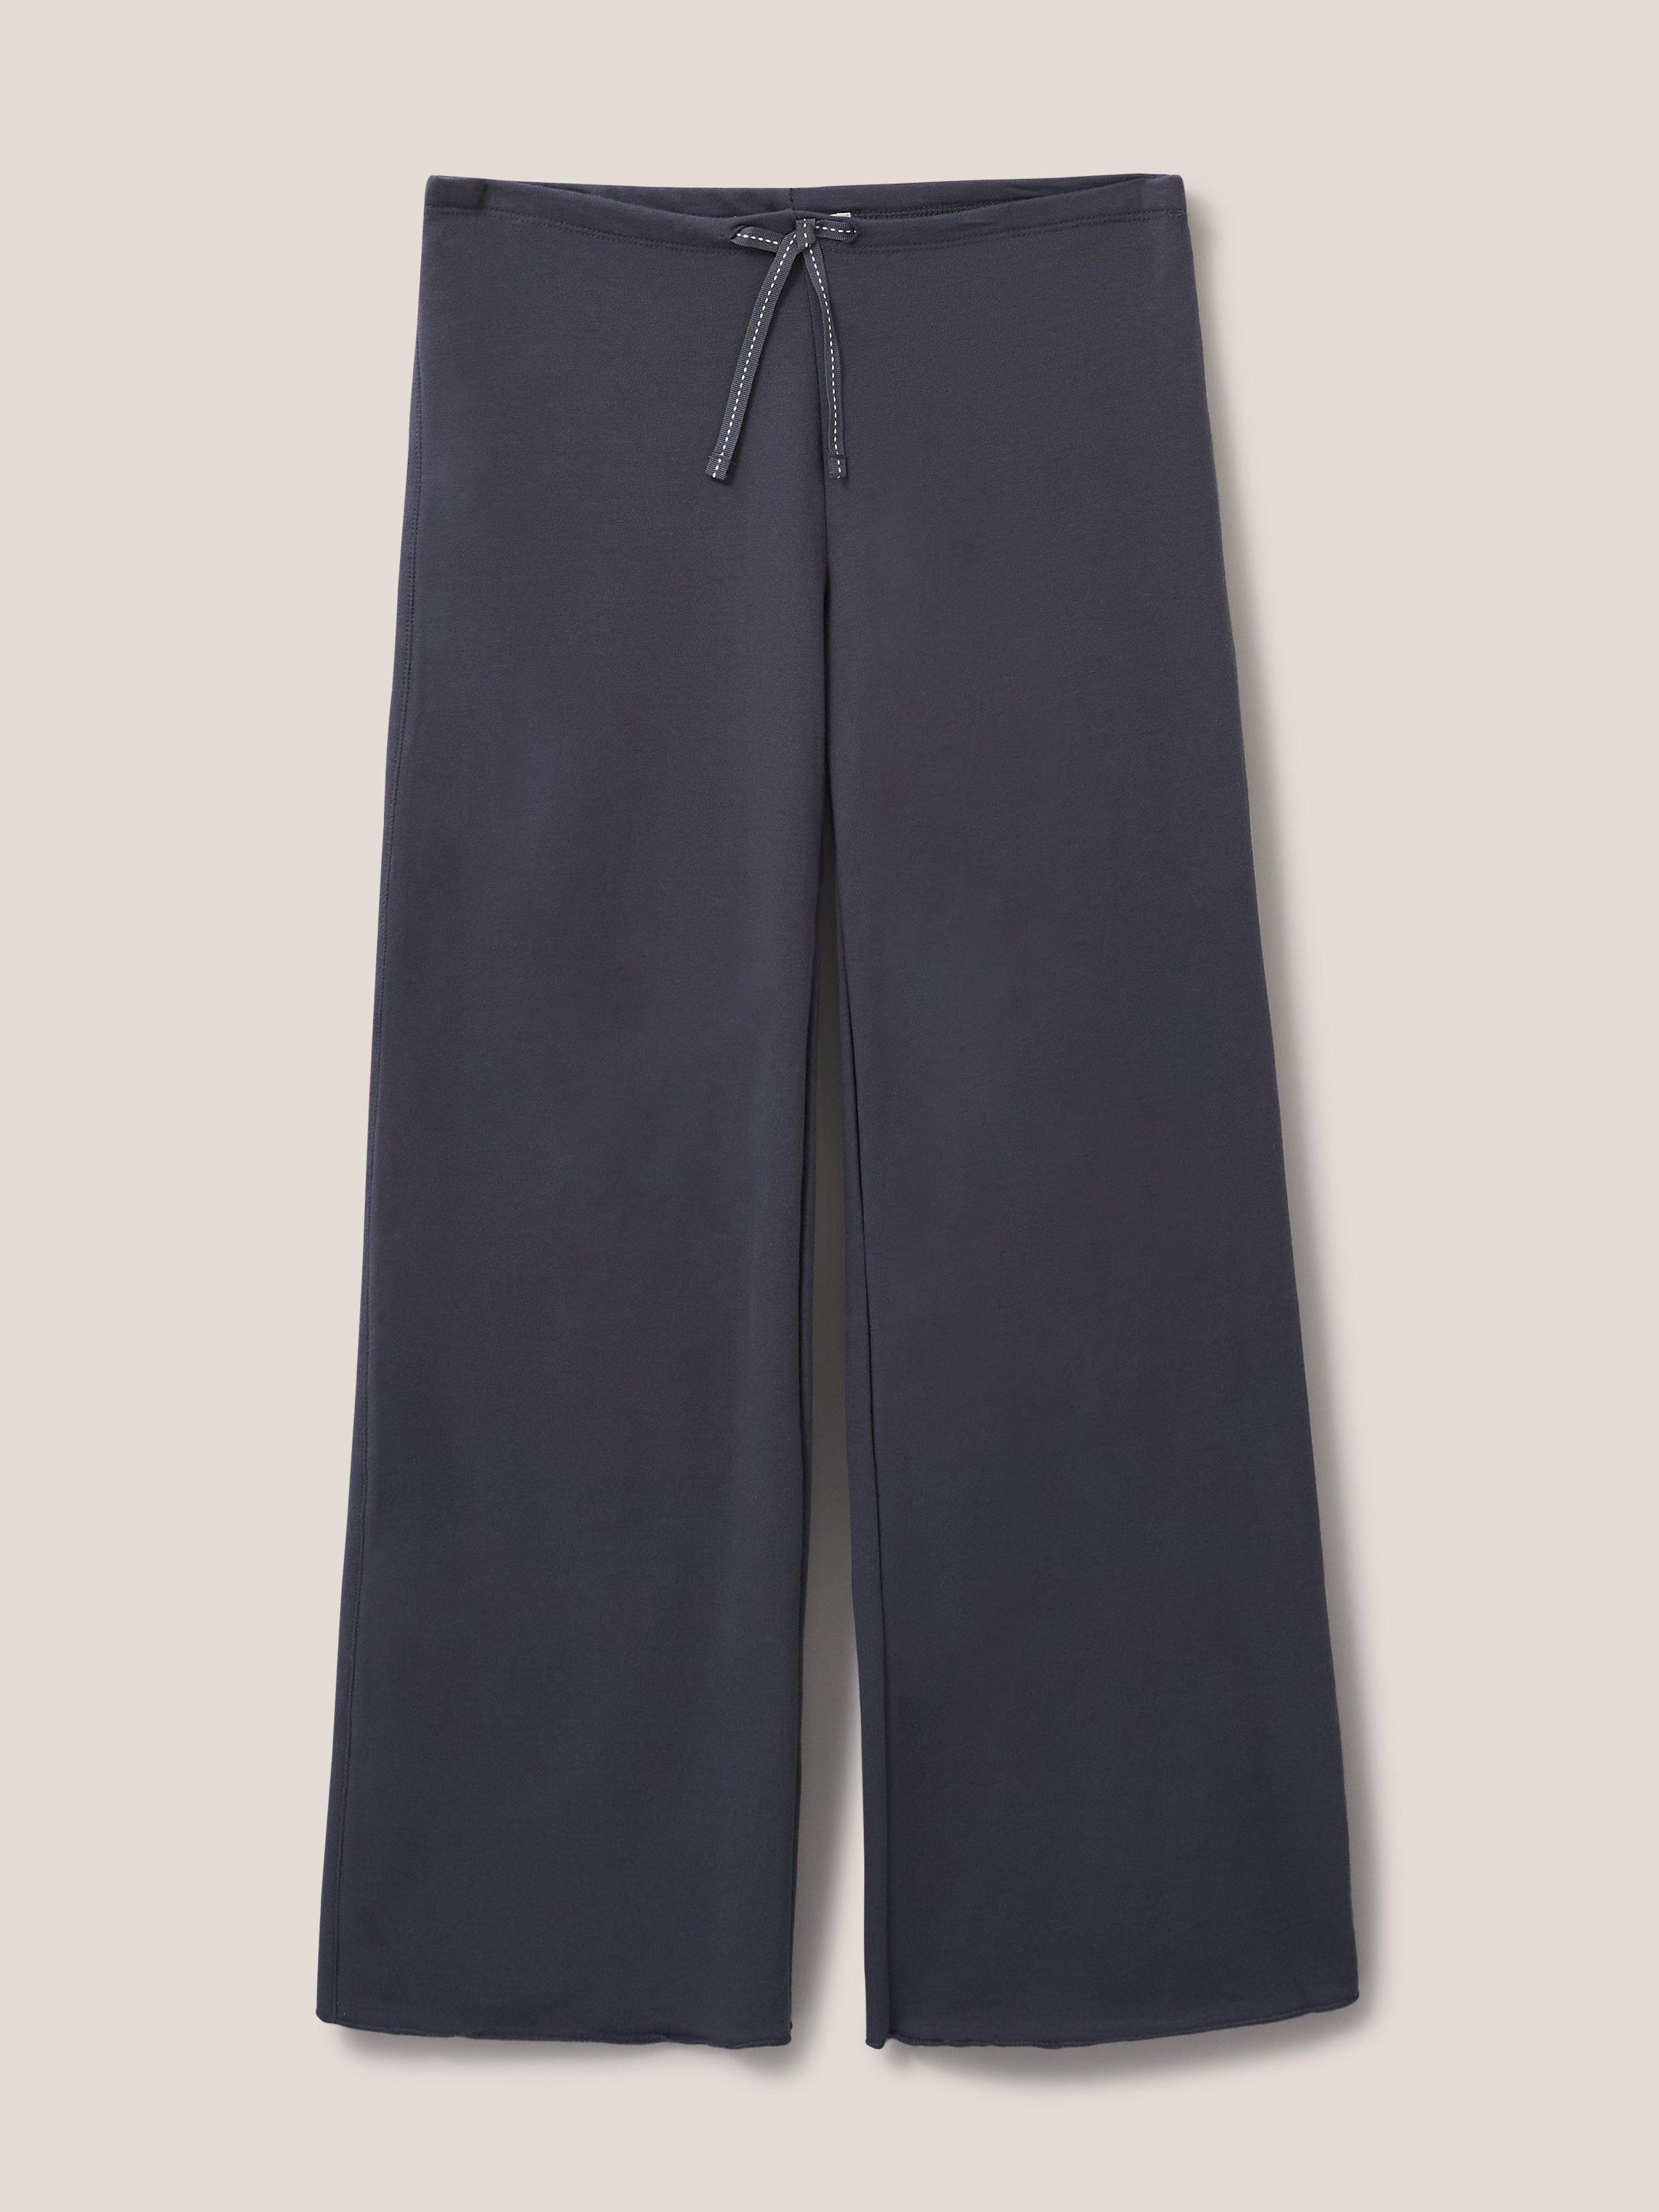 Dolce Organic Pant in CHARC GREY - FLAT FRONT